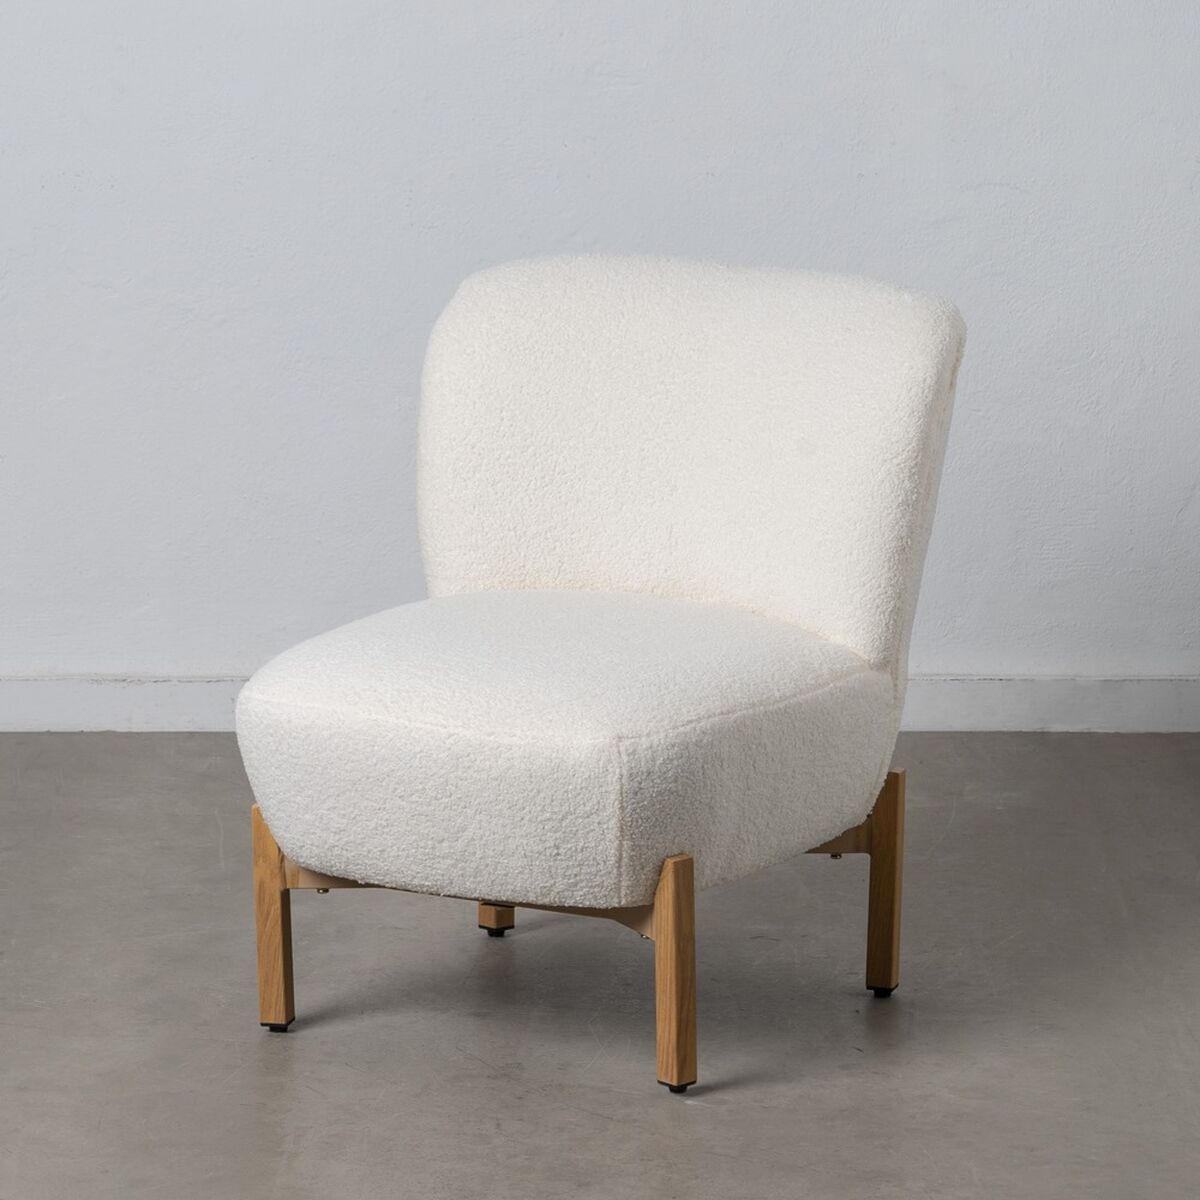 White Armchair with Metal Legs and Wood Finish (62 x 75 x 74 cm)